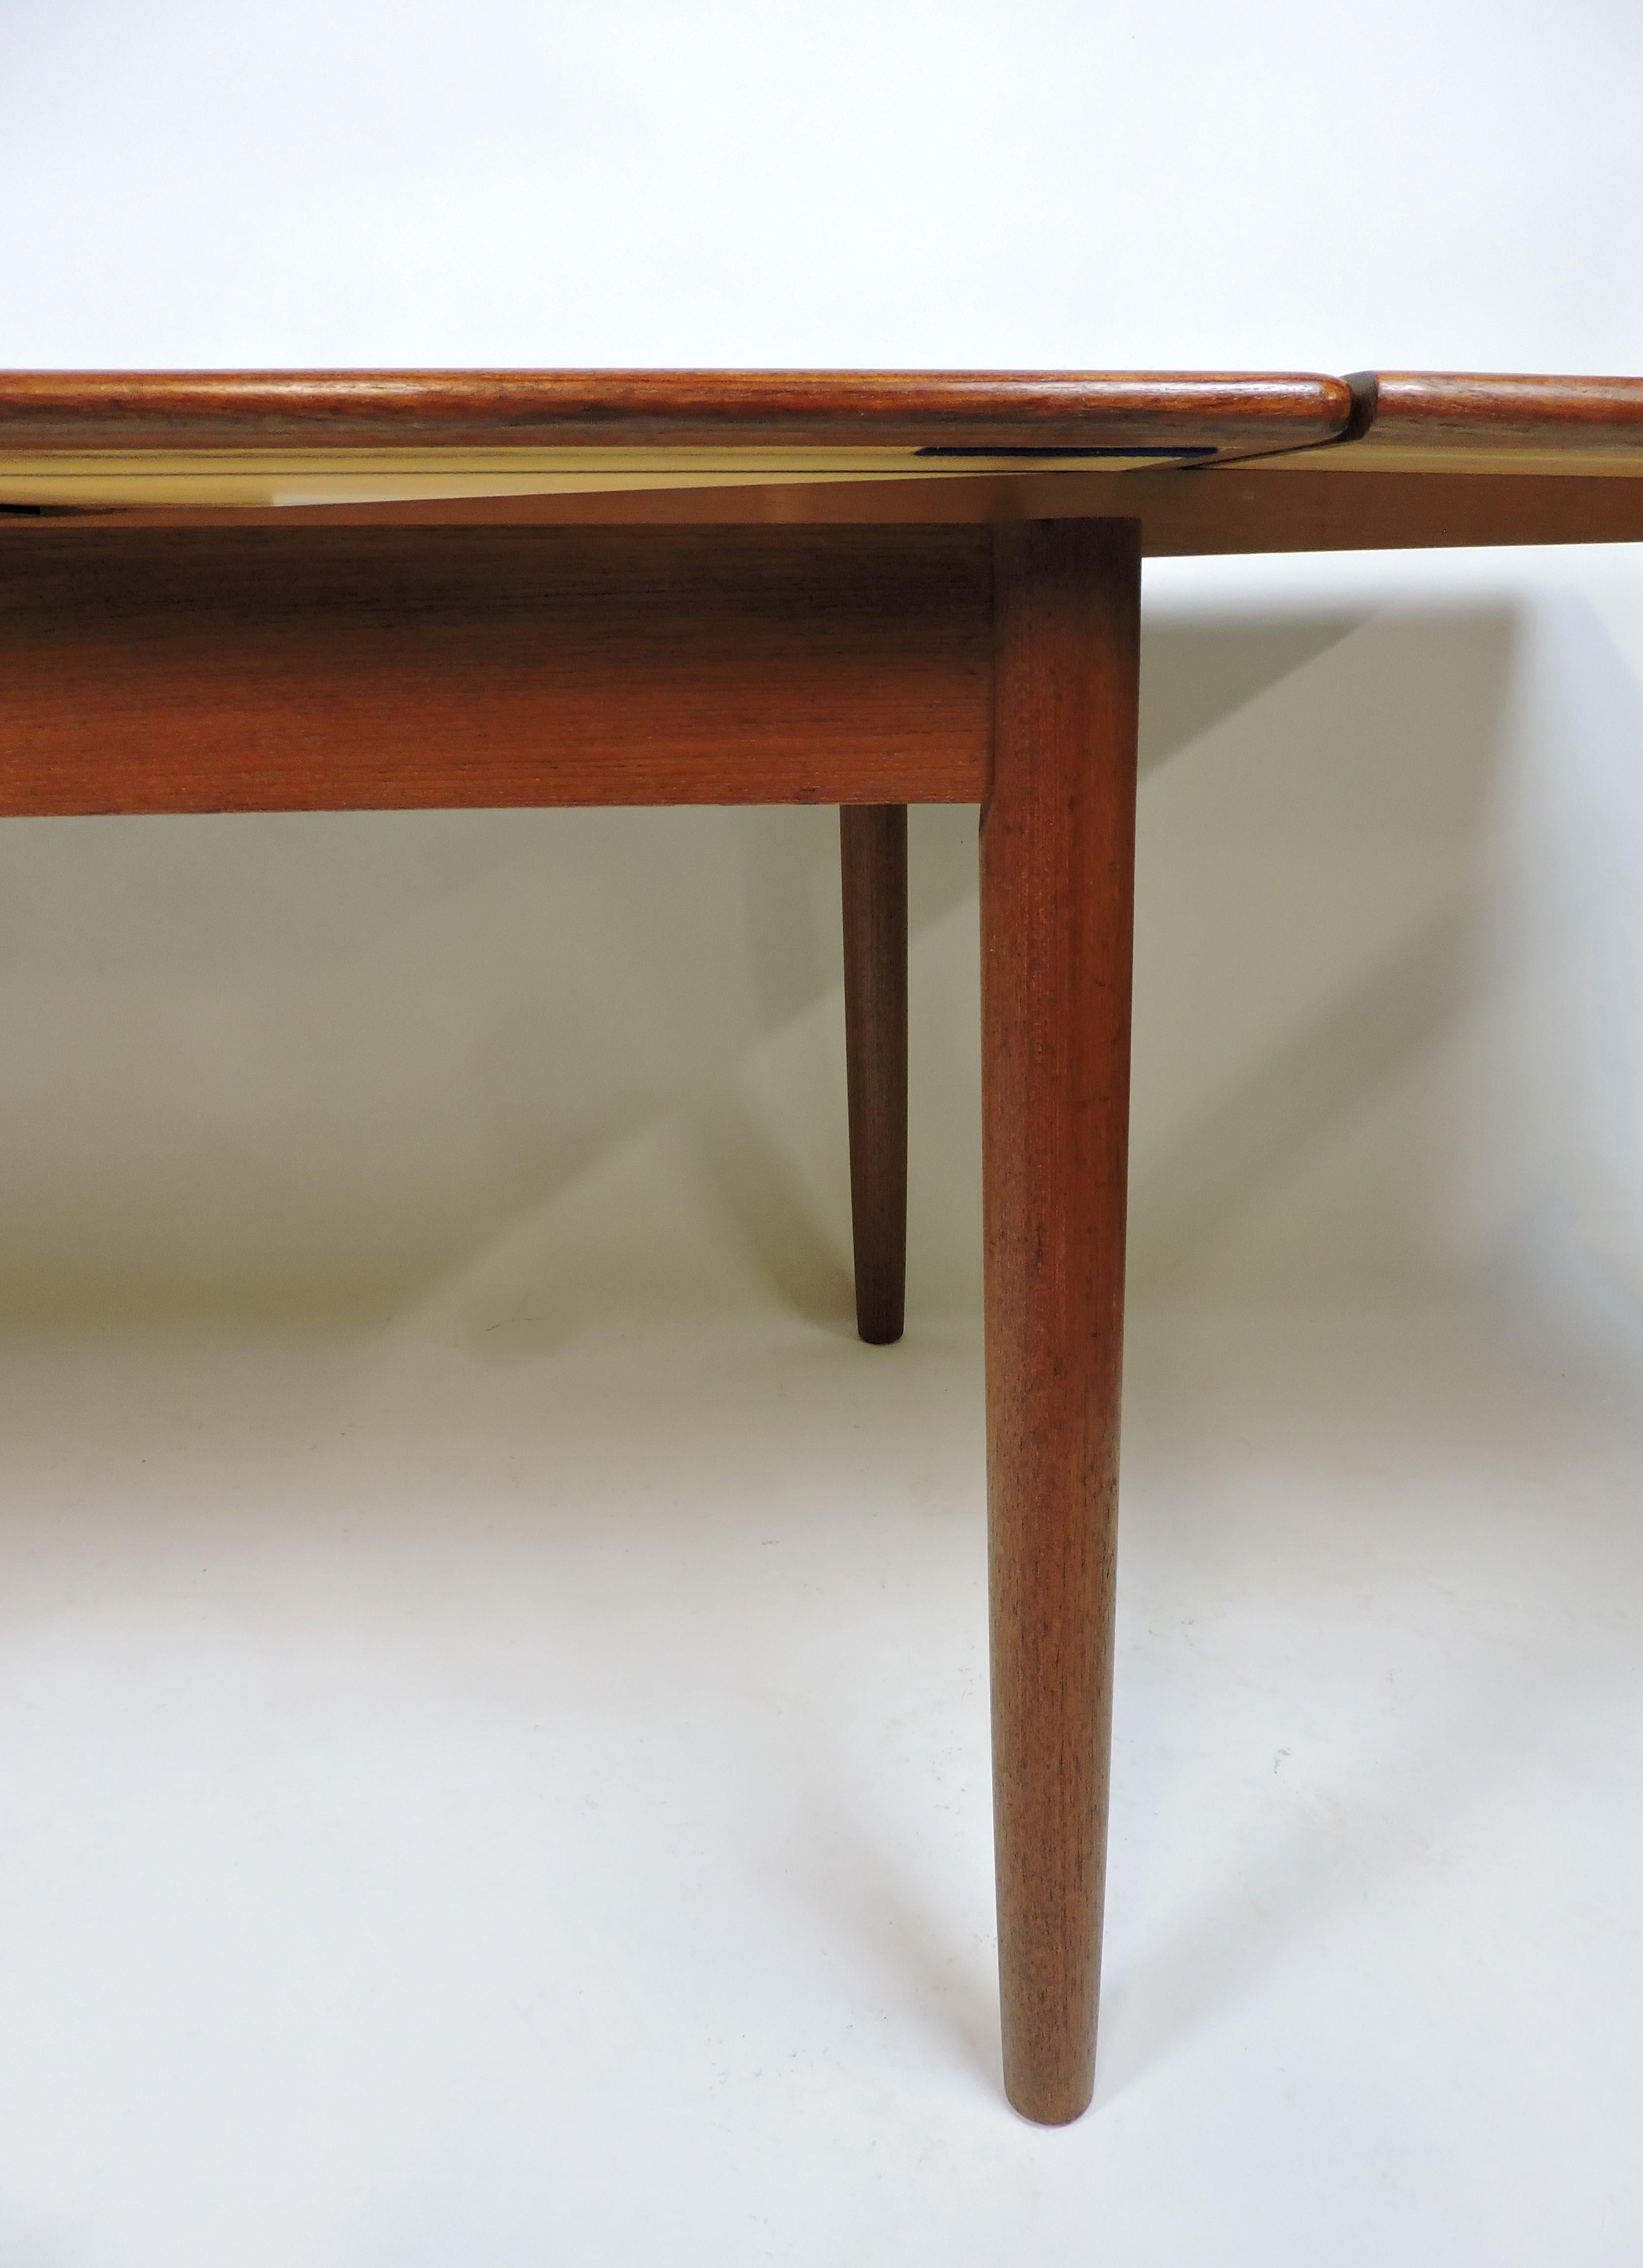 Large Danish Modern Teak Extendable Dining Table with Self-Storing Leaves 1